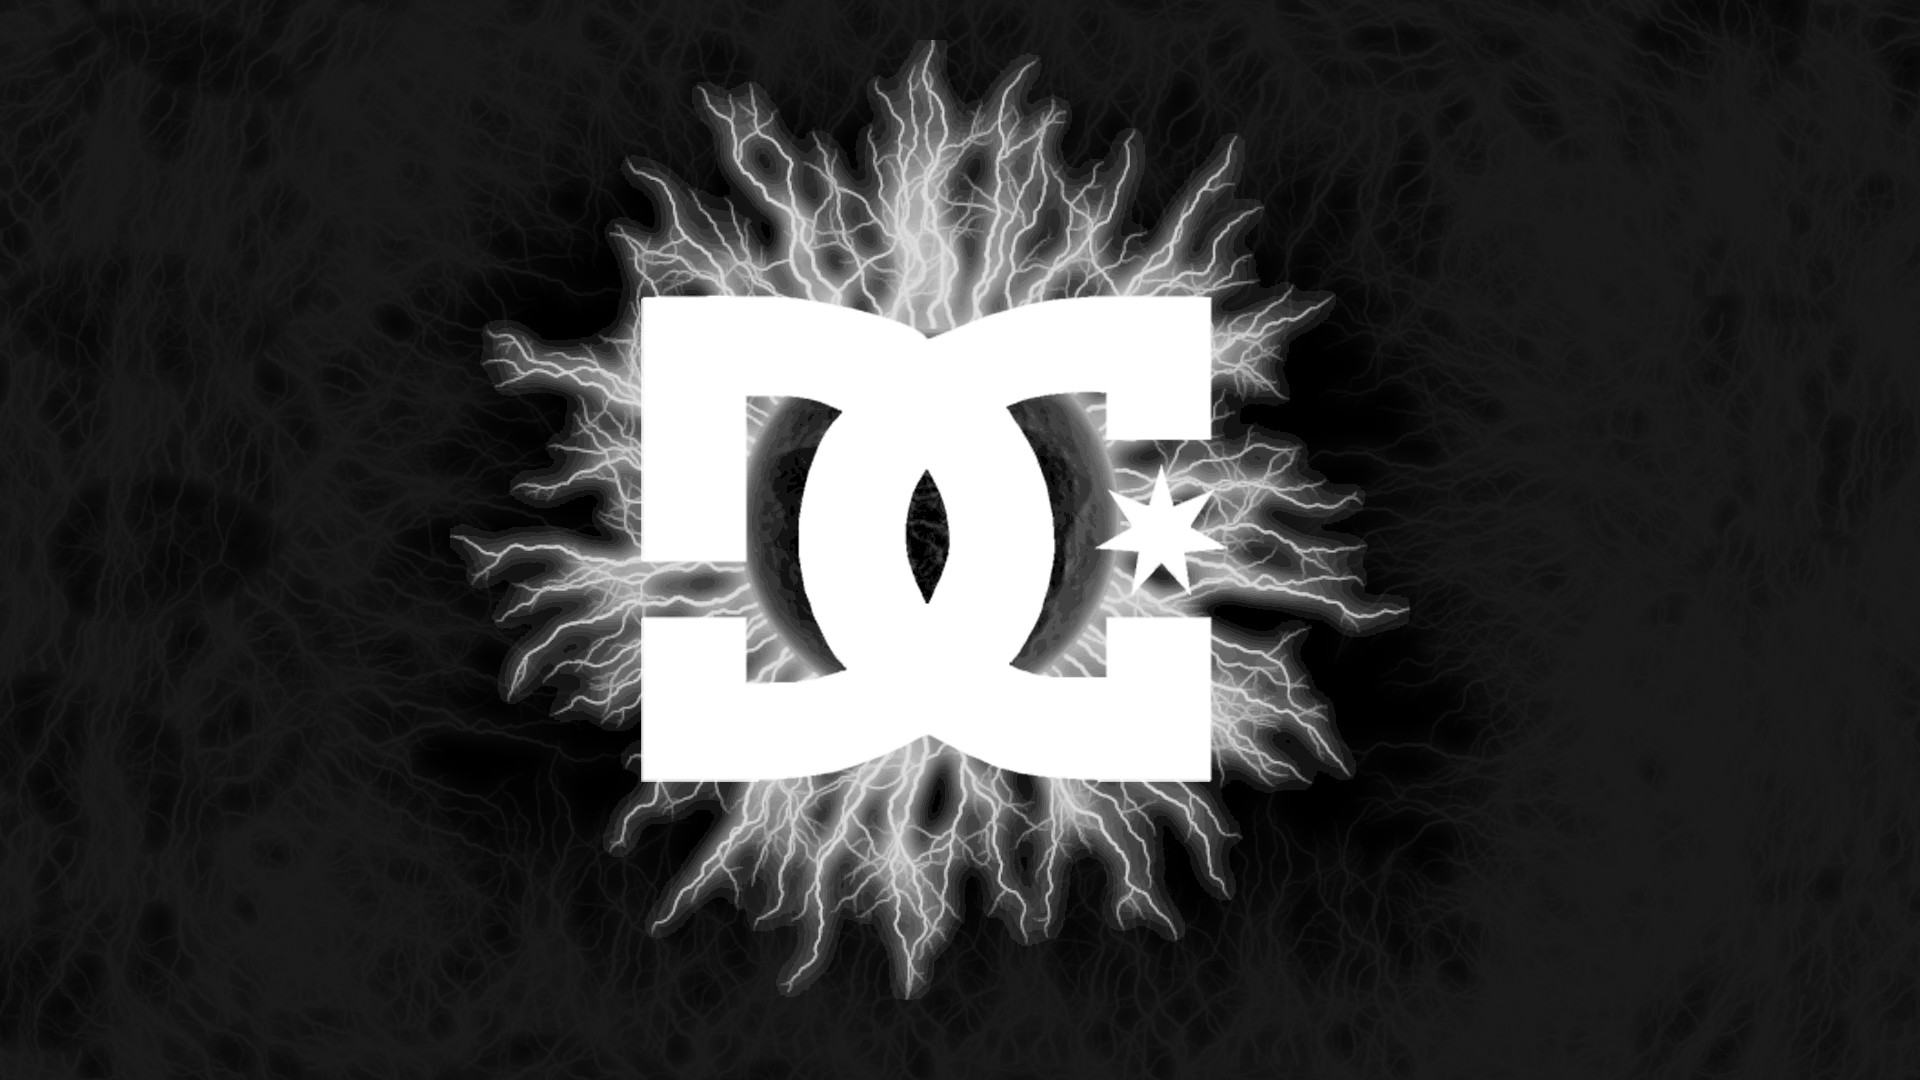 1920x1080 ... DC Shoes Wallpaper by MetalSlasher on DeviantArt ...